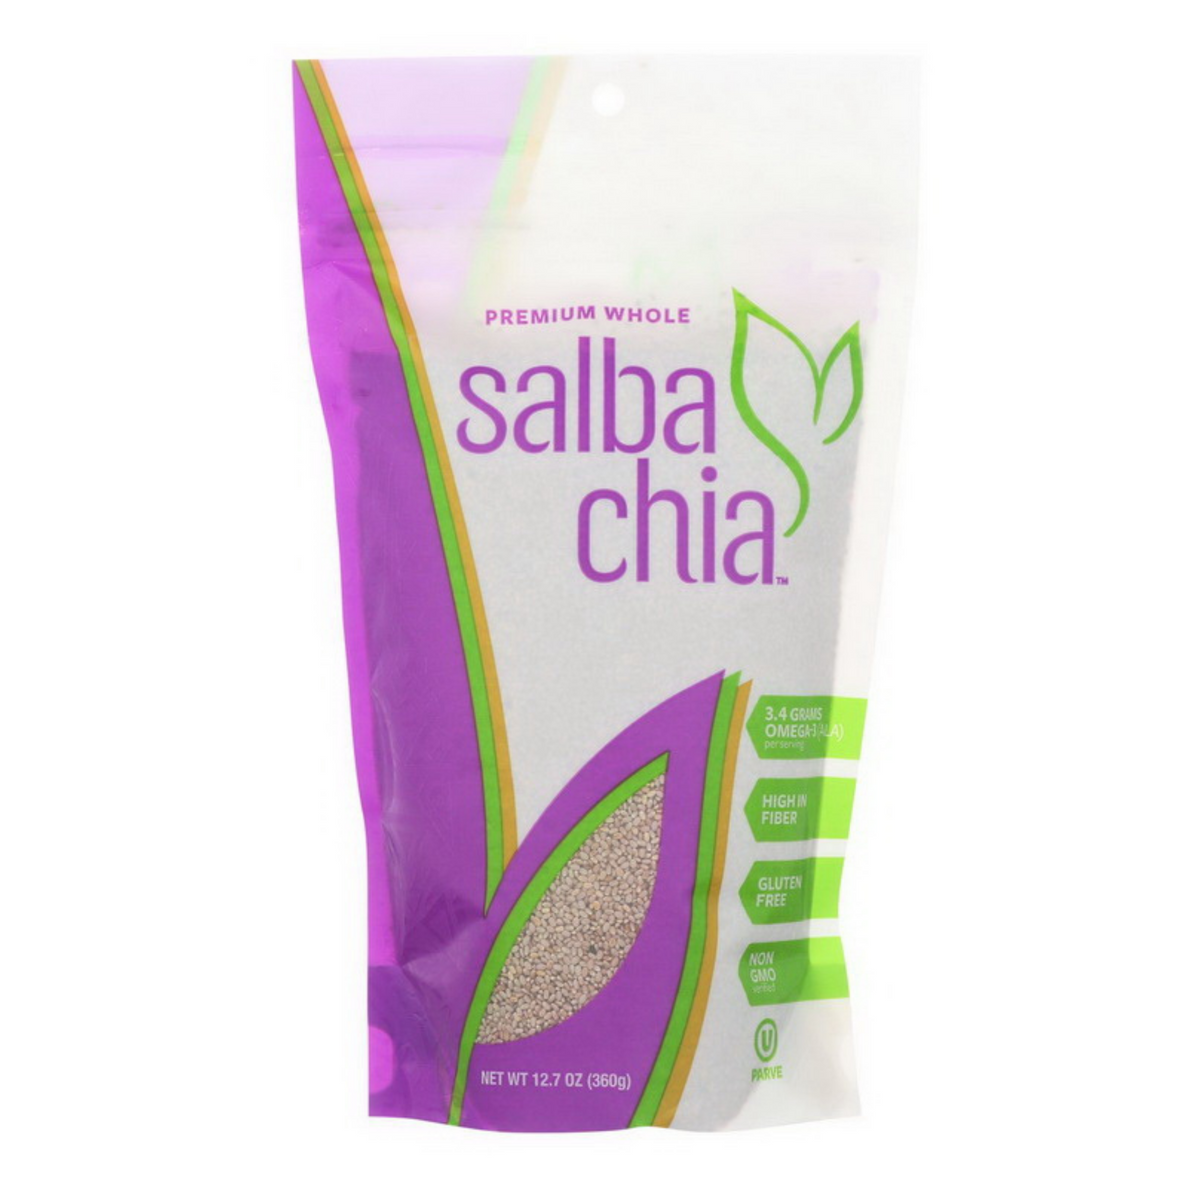 Primary image of Premium Whole Chia Seed 